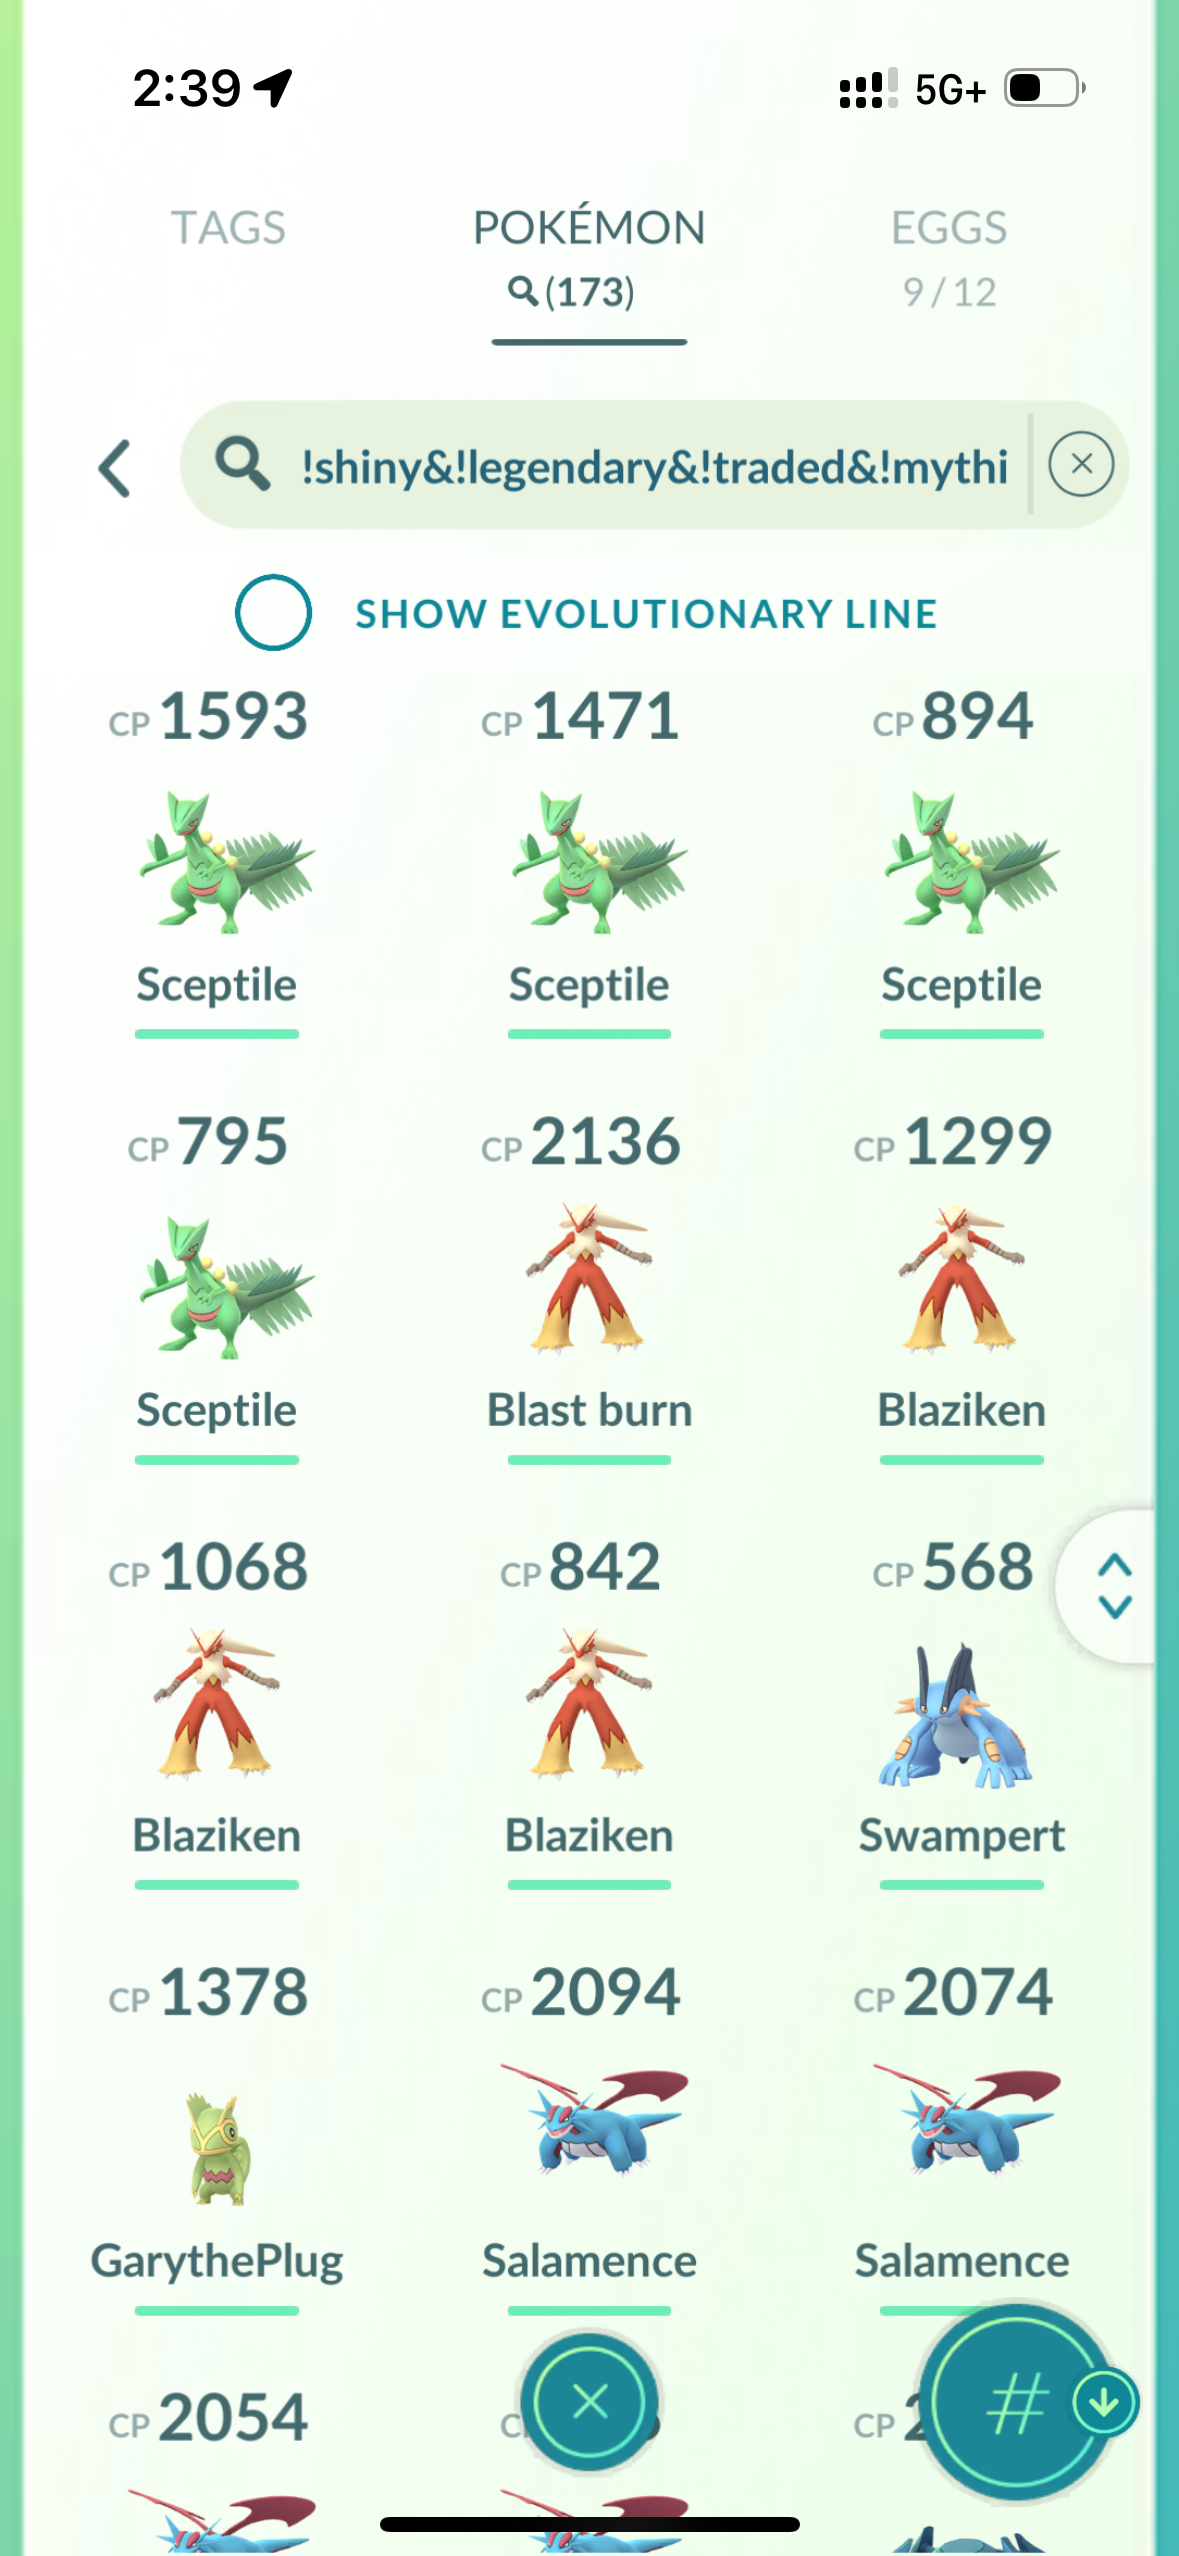 GTP11 account (5 years old/112 shiny/legendary)